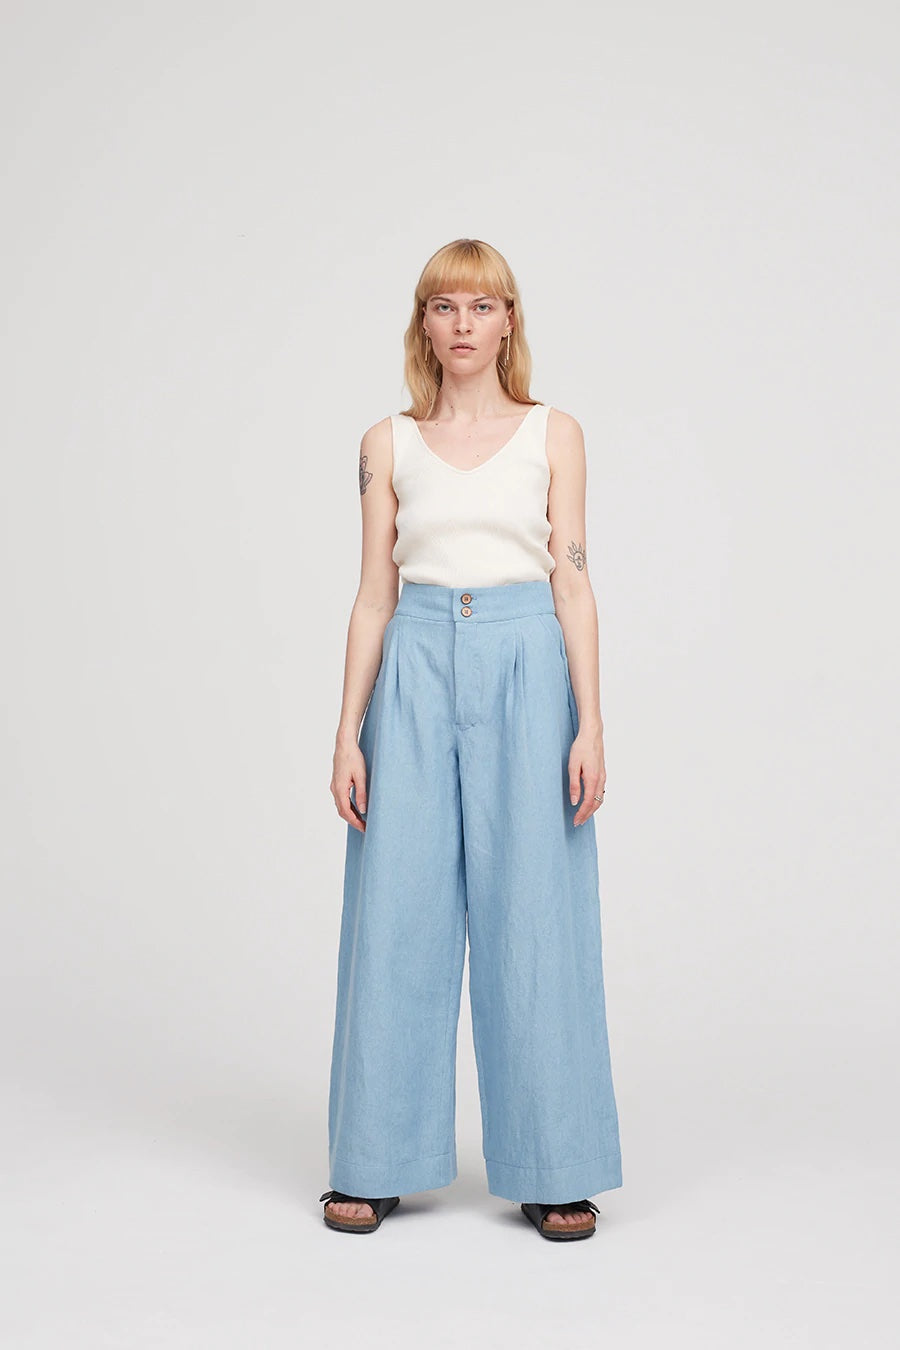 Woman wearing the Spring Trousers sewing pattern from The Modern Sewing Co on The Fold Line. A trouser pattern made in lightweight cottons, silk, Tencel twill or corduroy fabrics, featuring very wide legs, front pleats, semi-elasticated back, slanted side